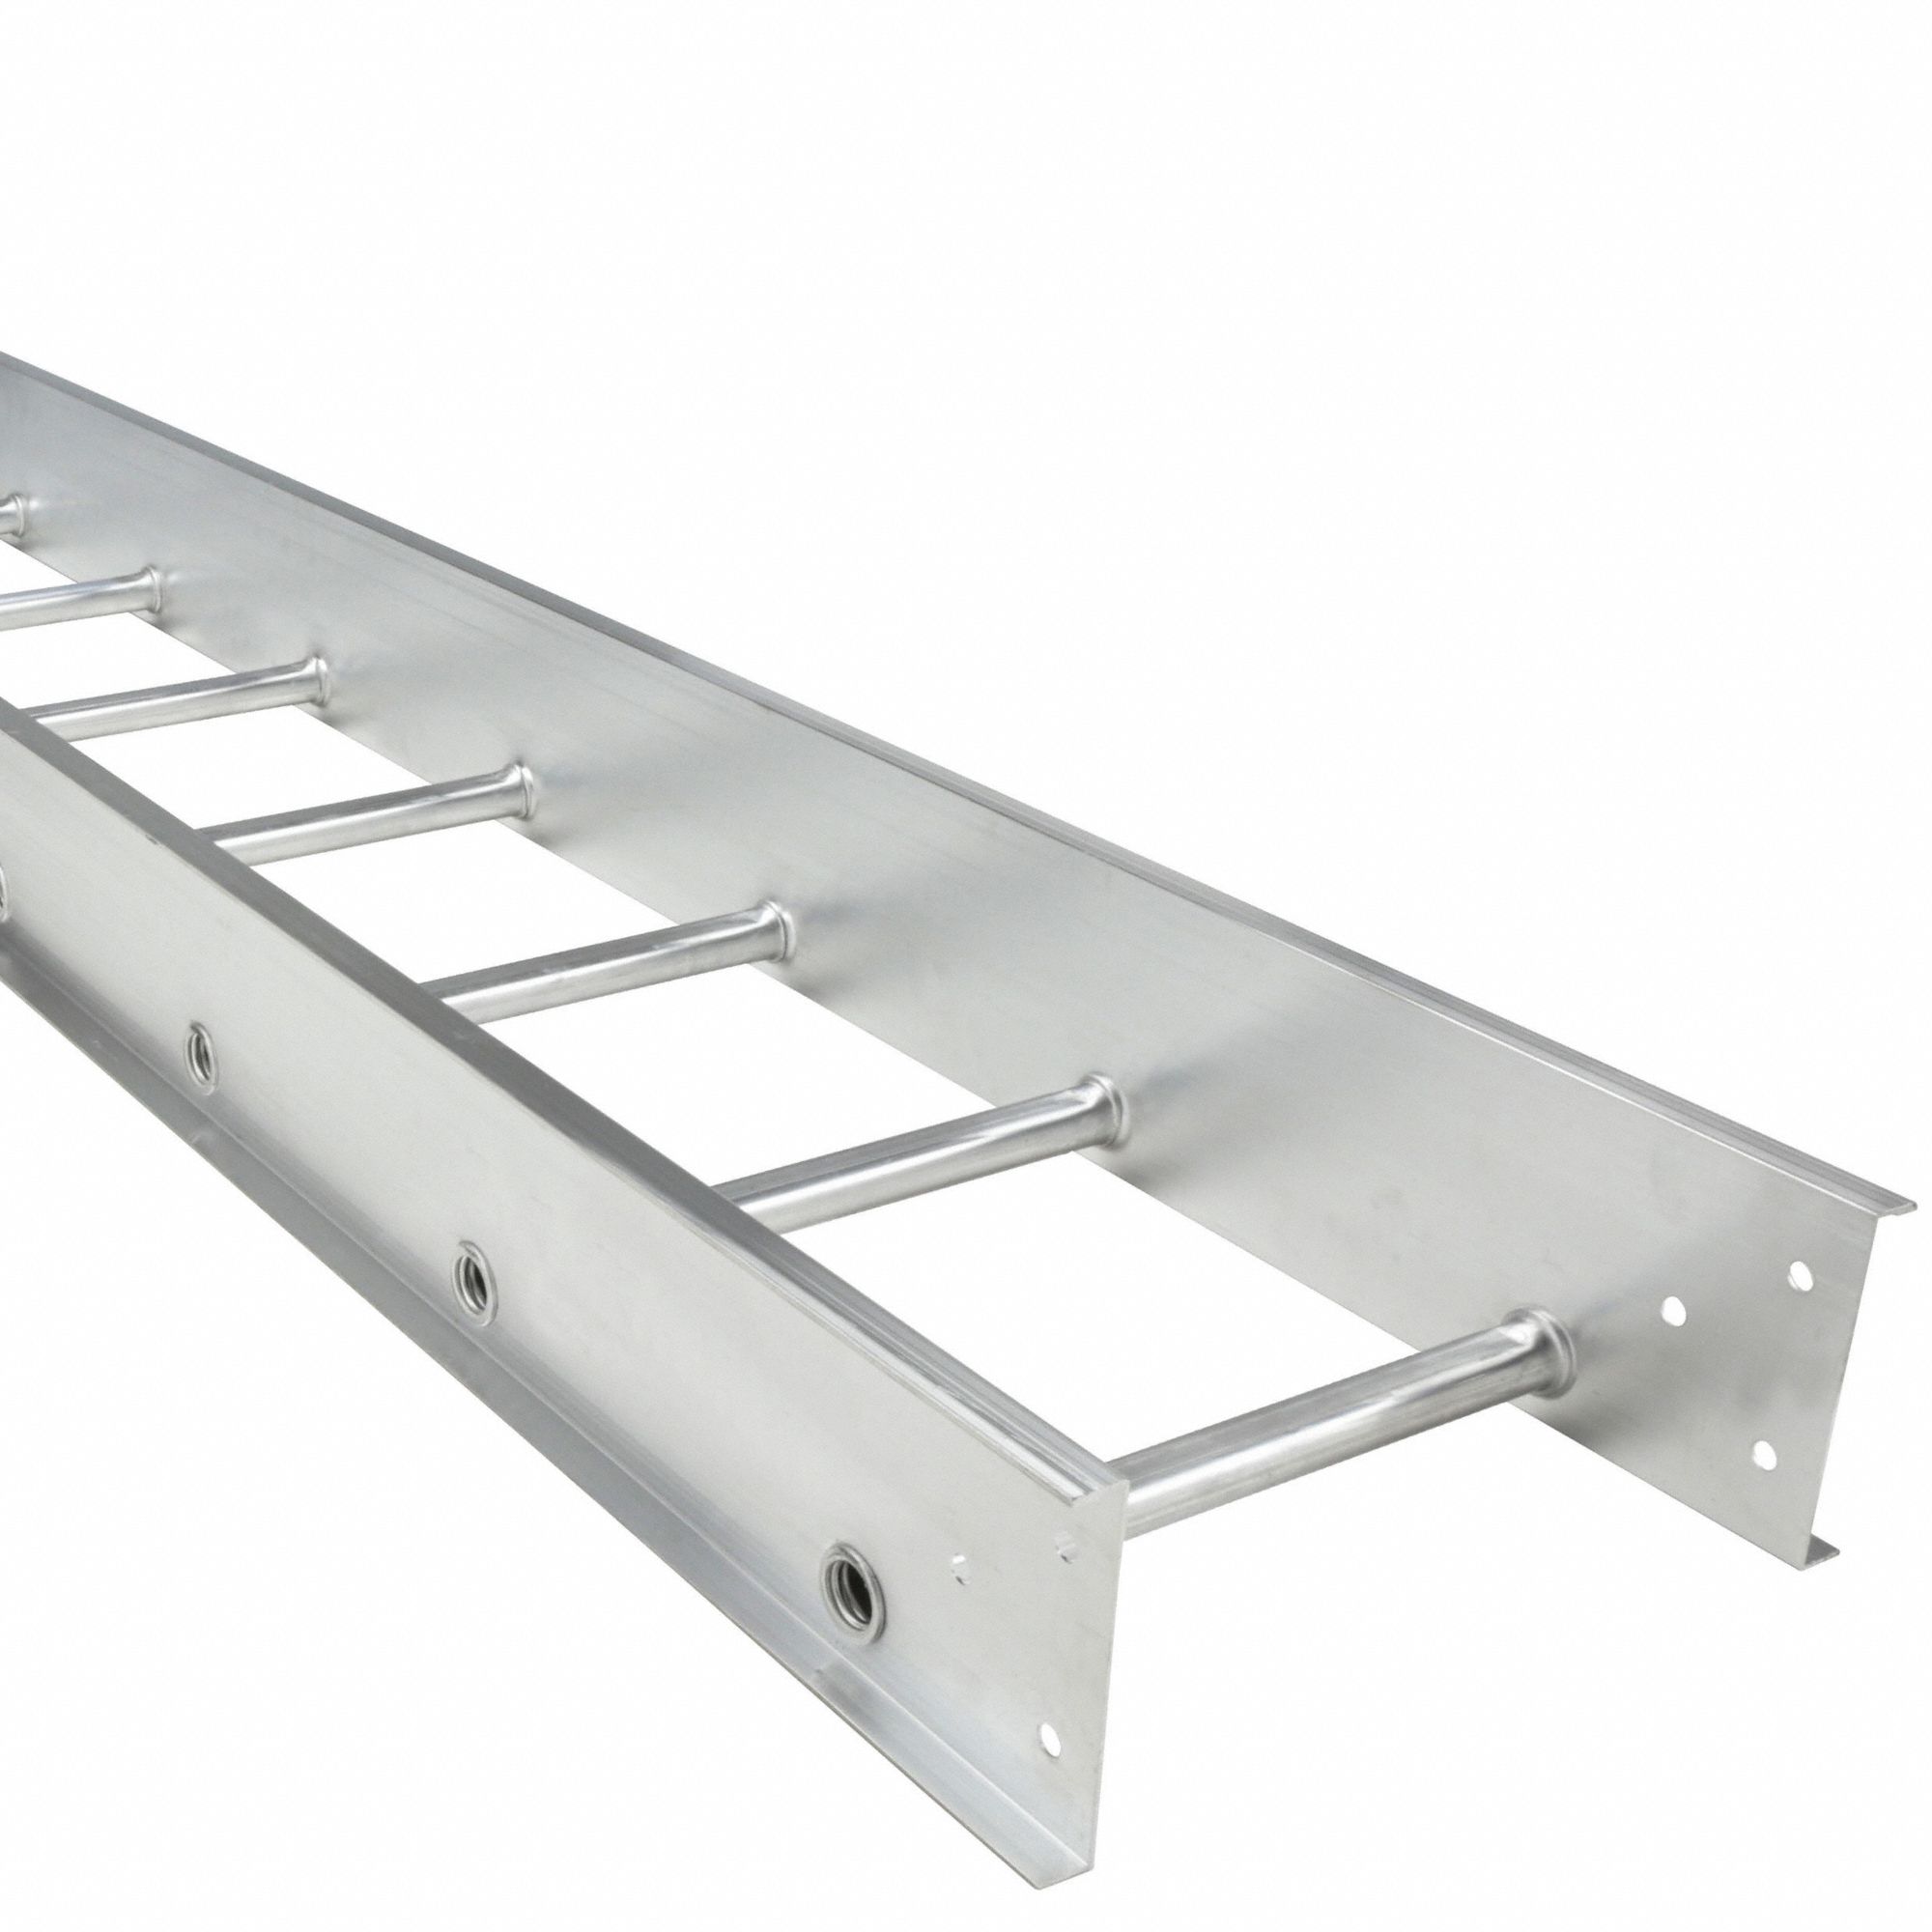 6 in Wd, 5 1/4 in Ht, Aluminum Ladder Tray - 784FA3